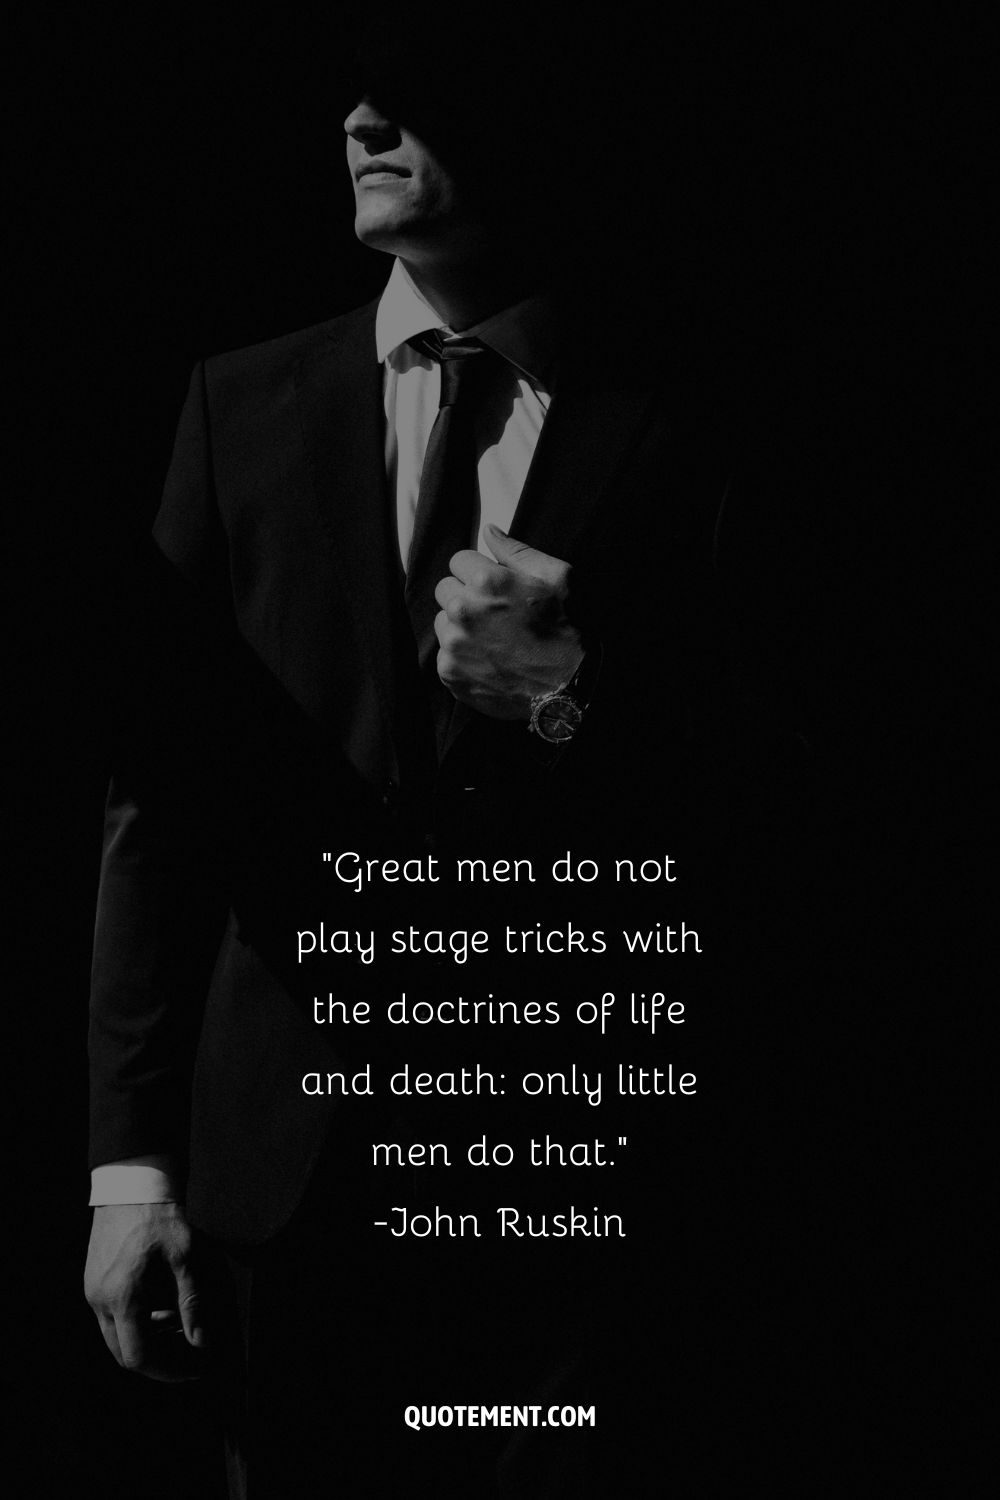 Great men do not play stage tricks with the doctrines of life and death only little men do that.